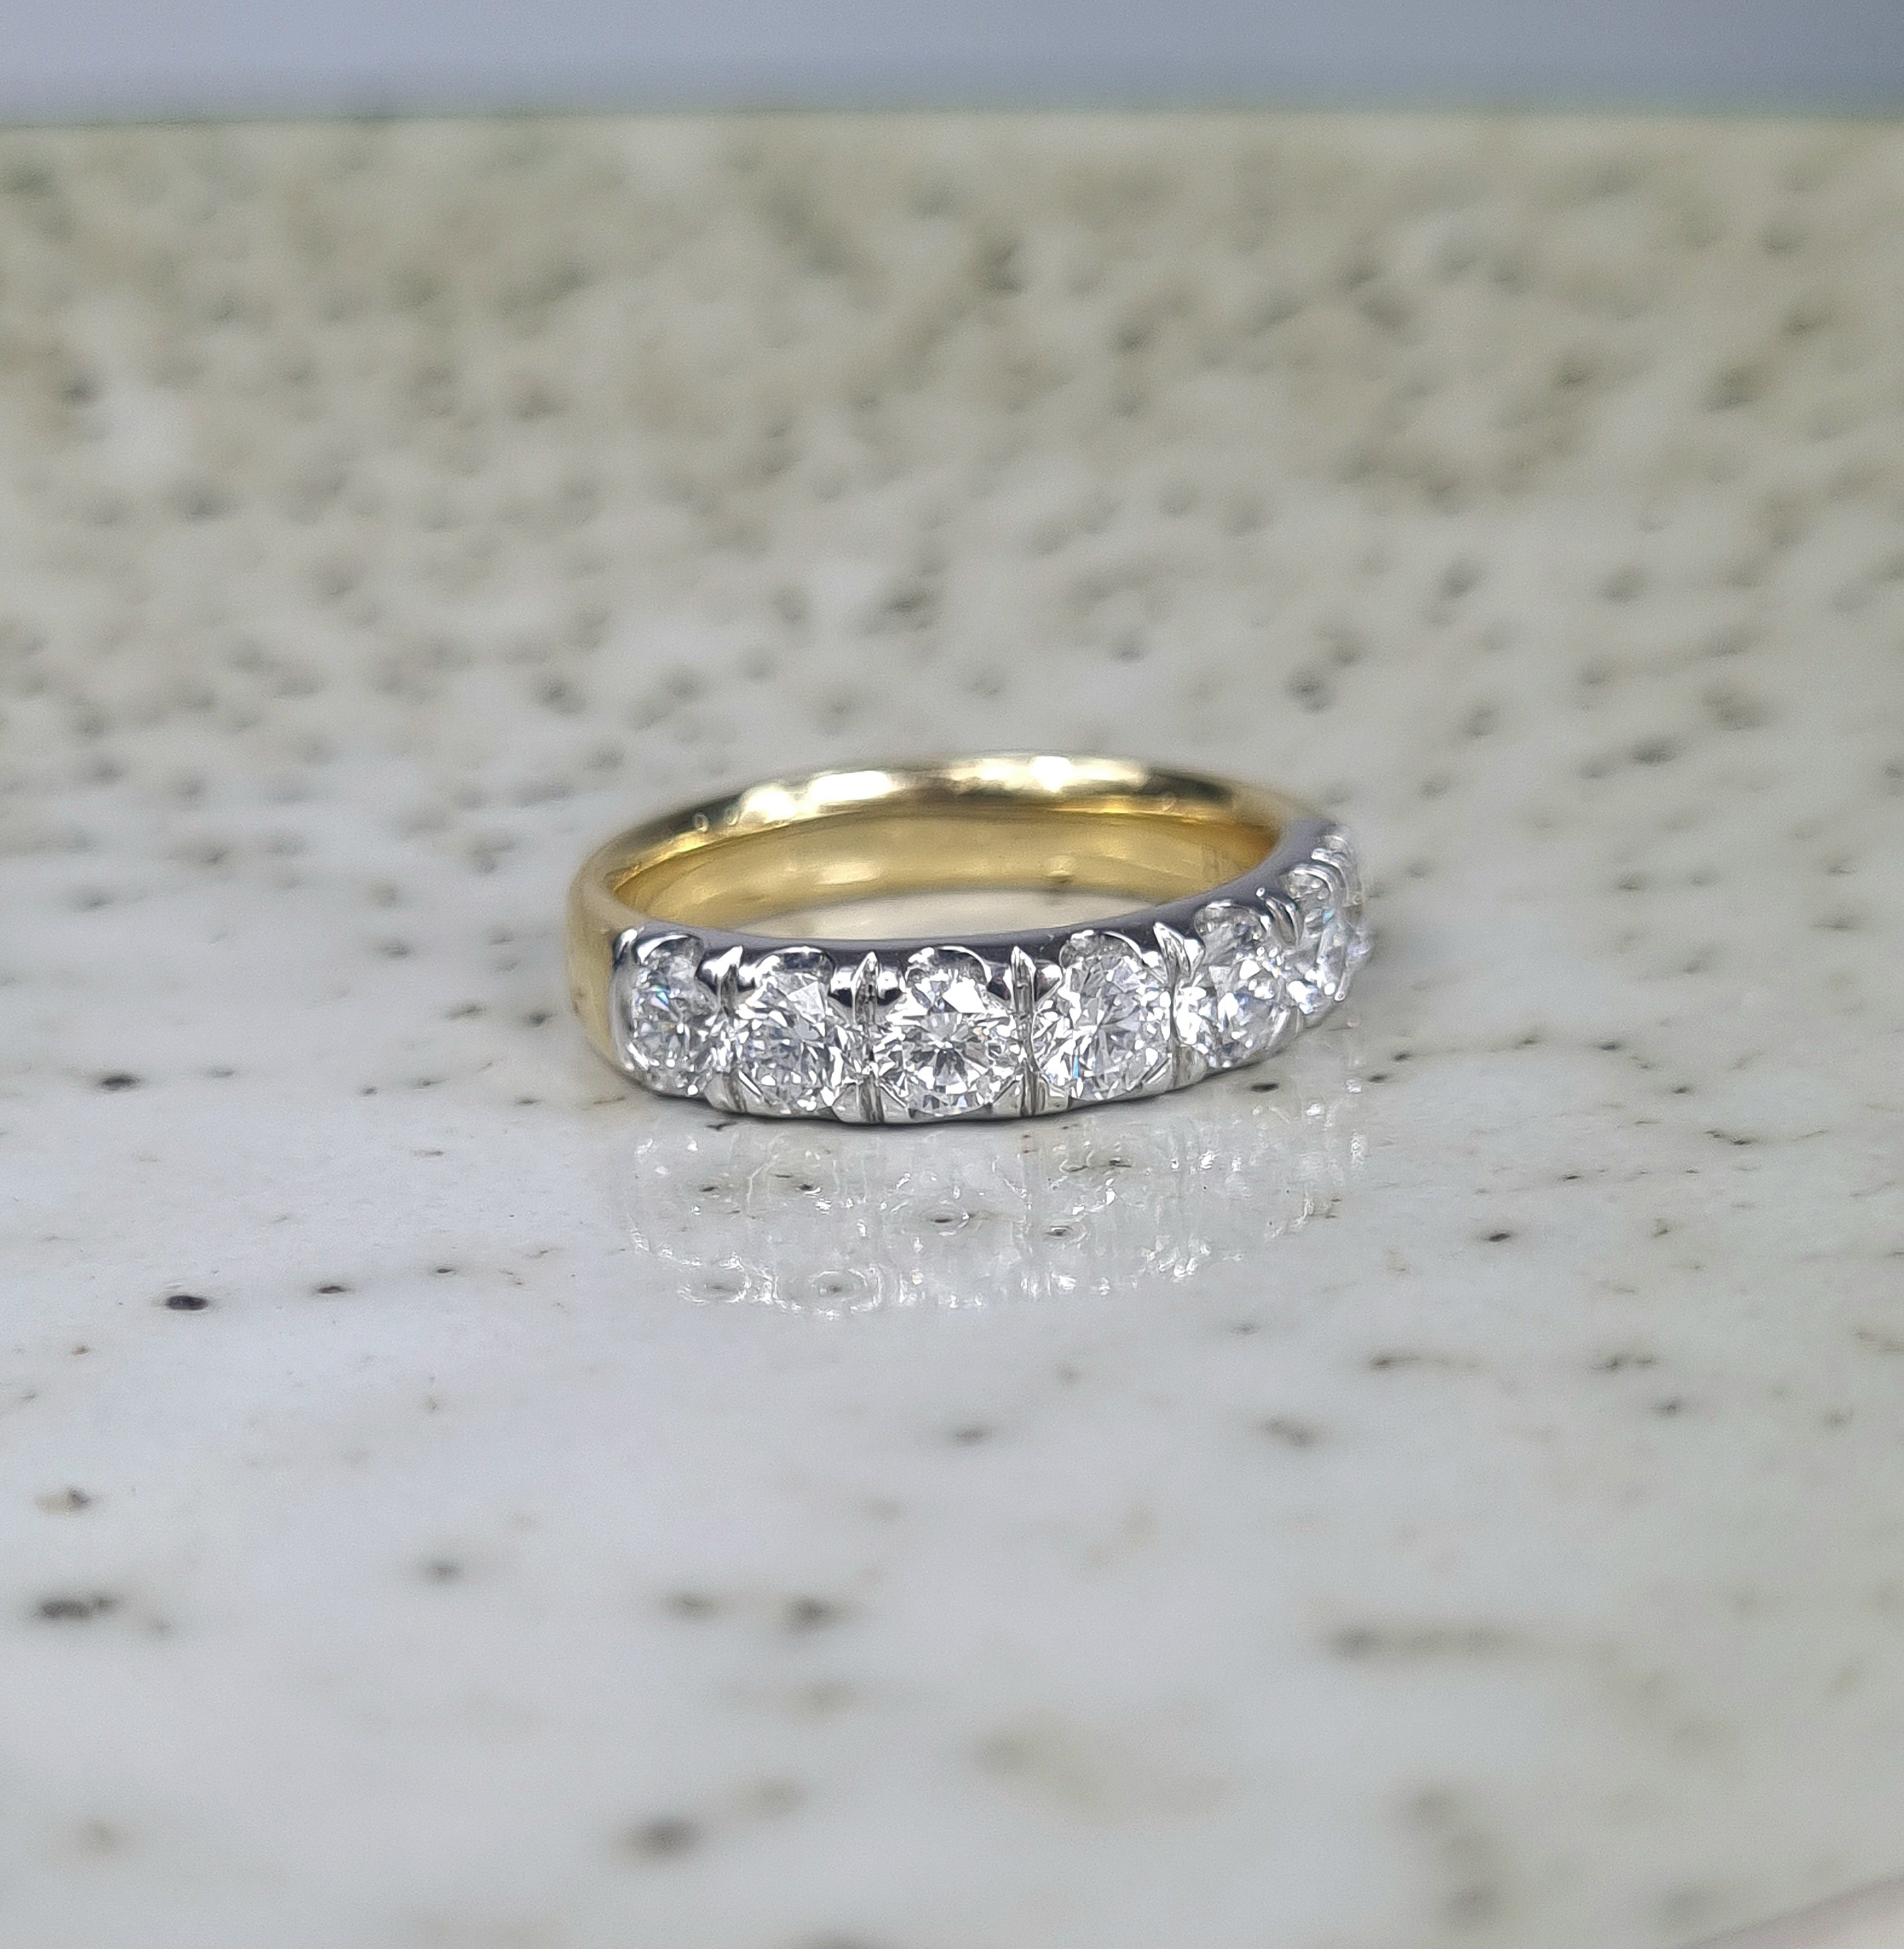 Platinum and 18ct Yellow Gold 'Ultimate Eternity' ring, 1.36 carats total.